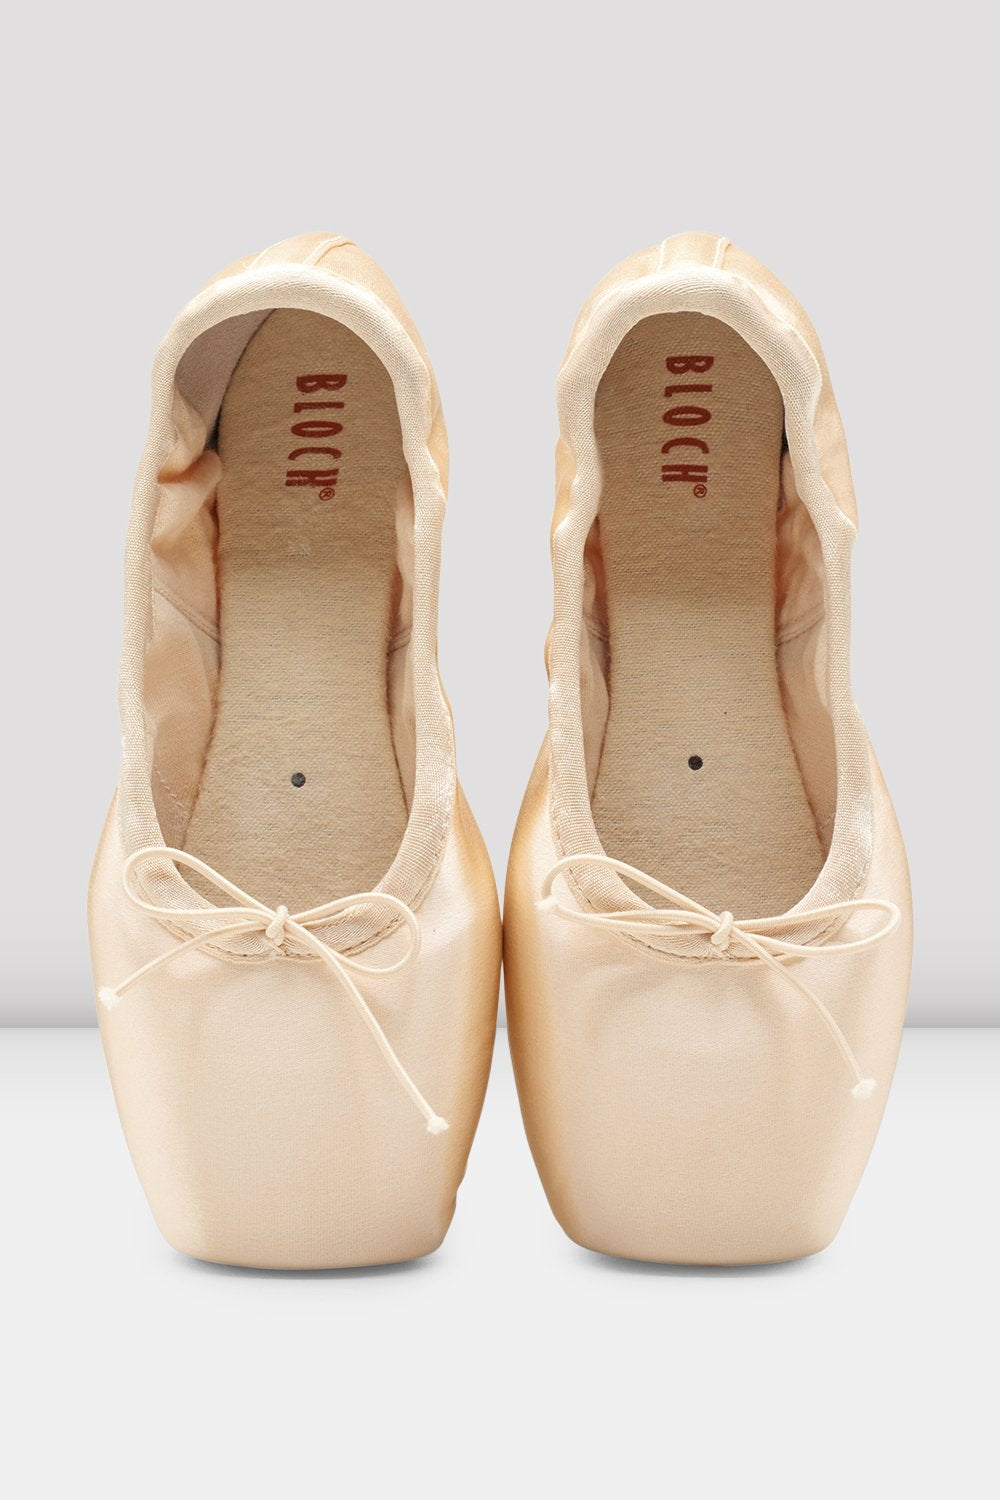 pointe shoe covers bloch